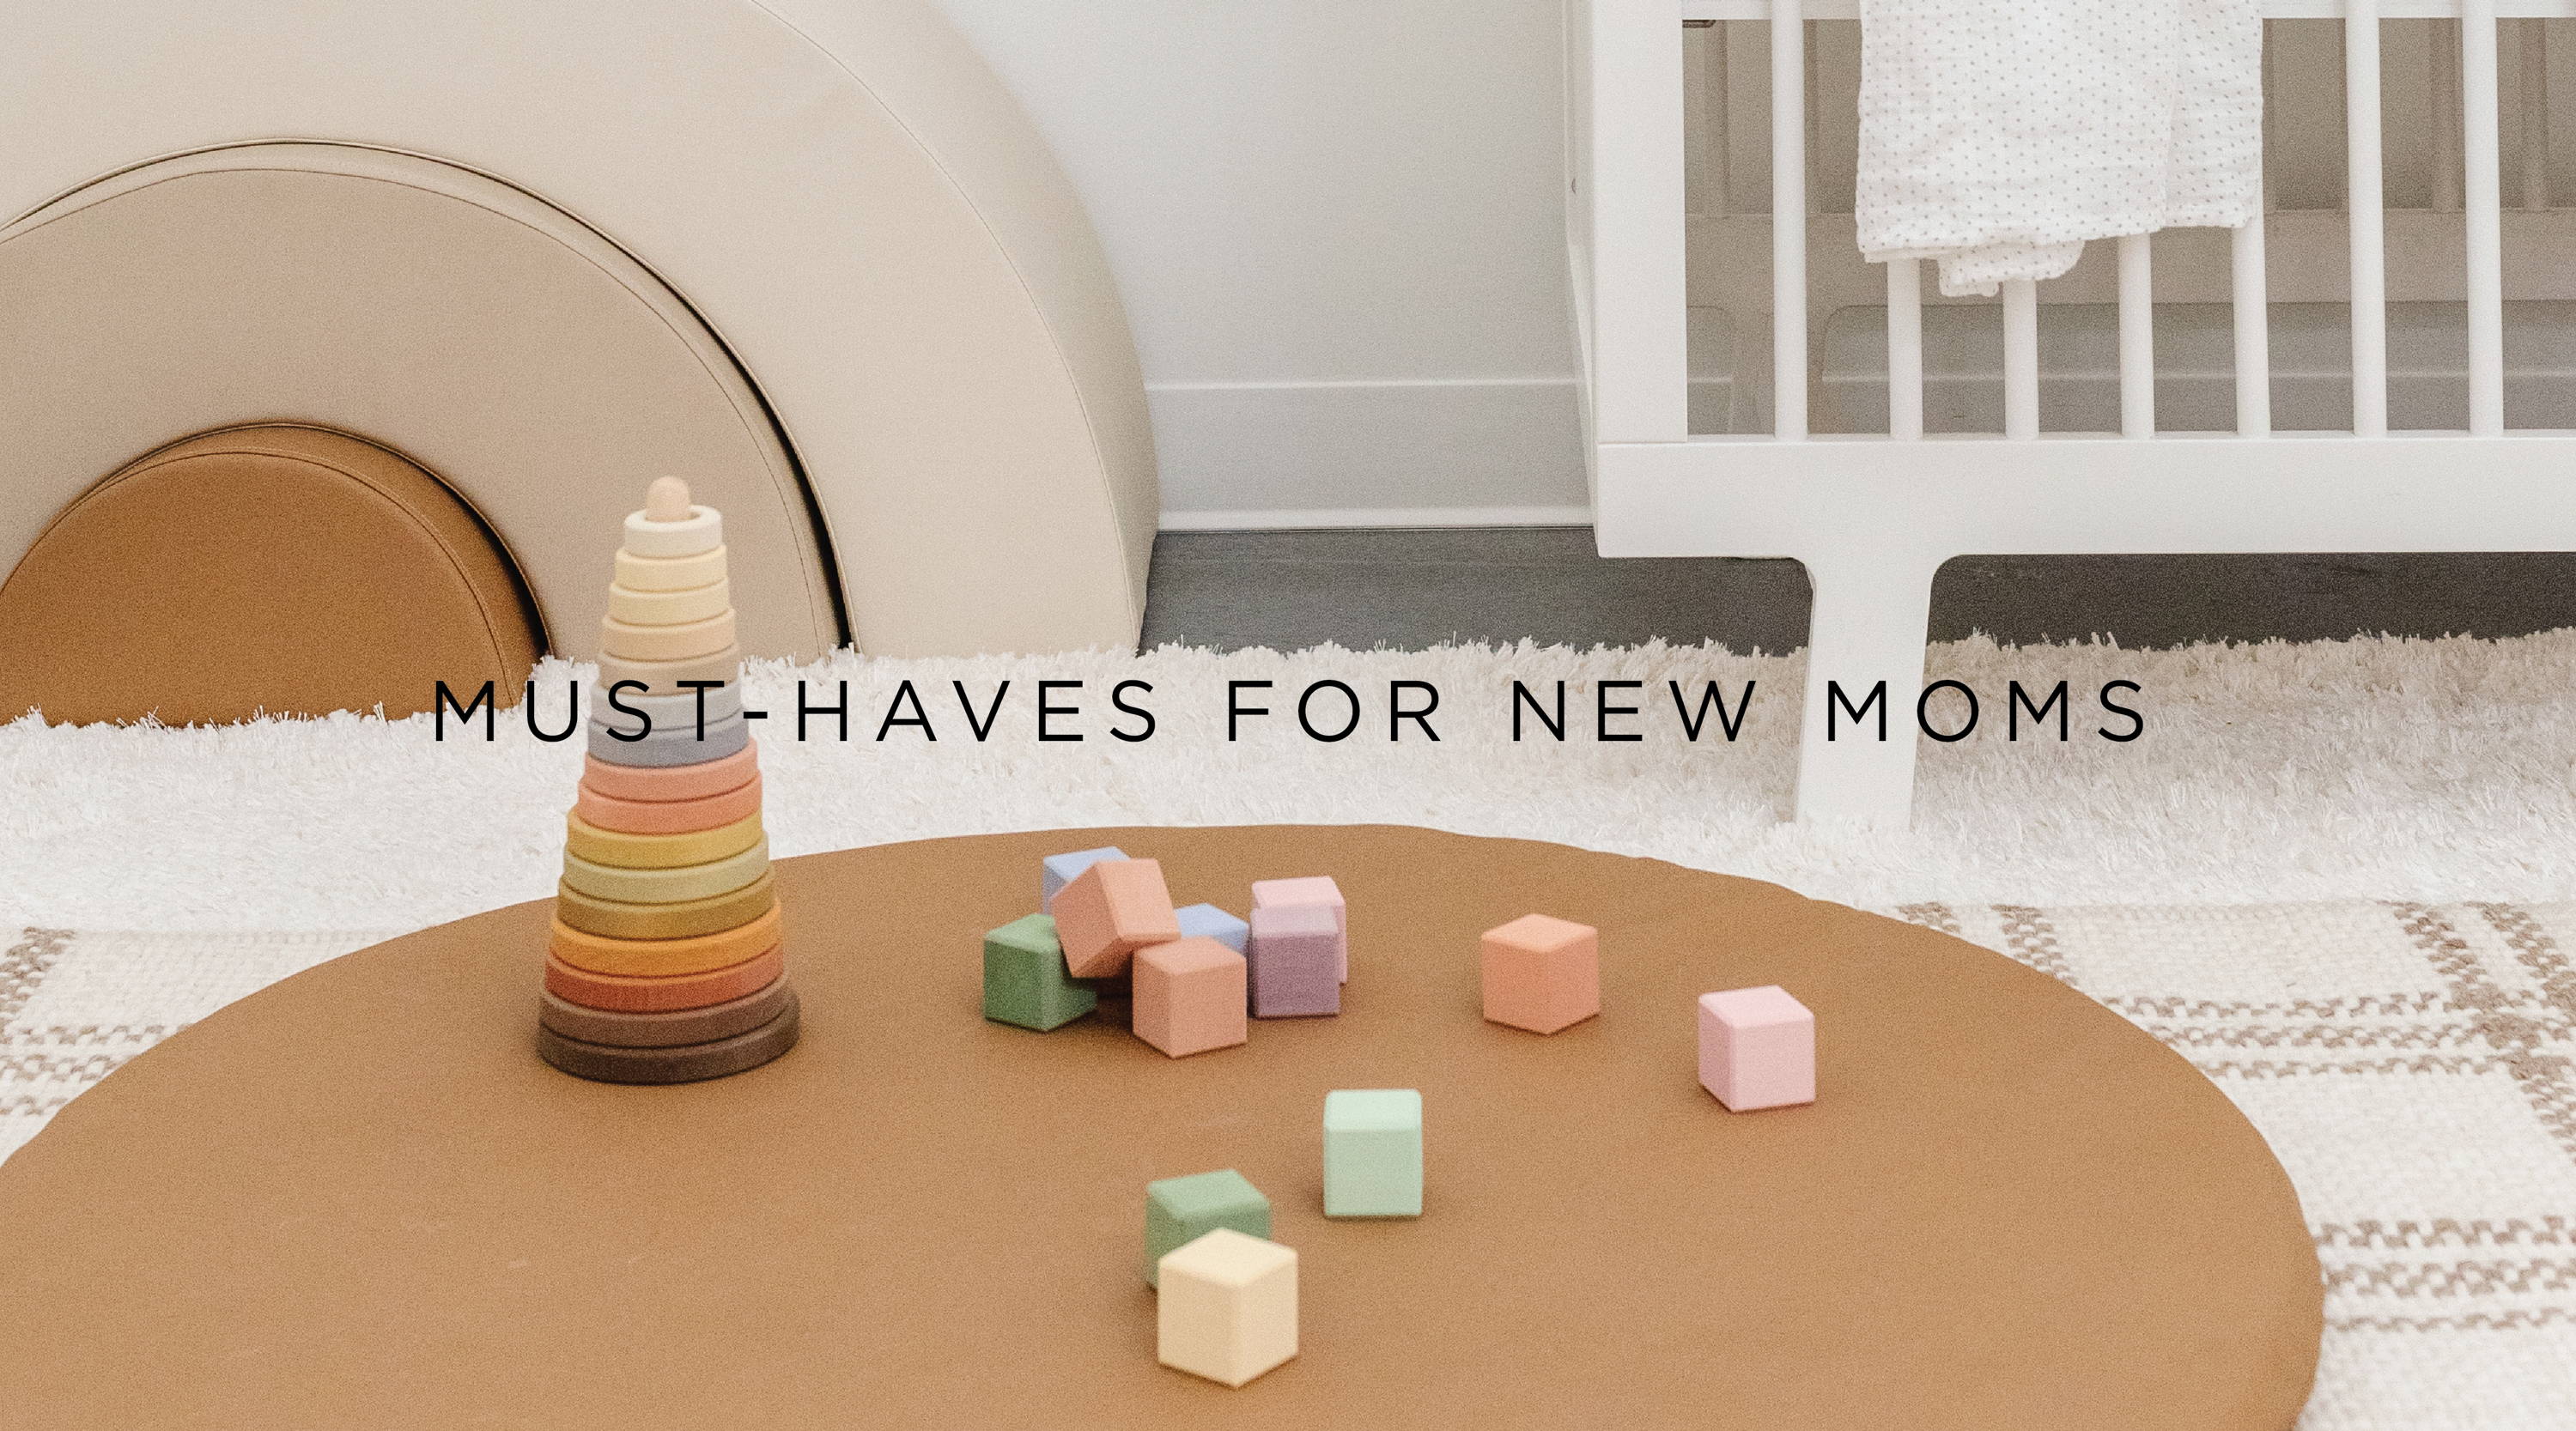 Must-haves for new moms